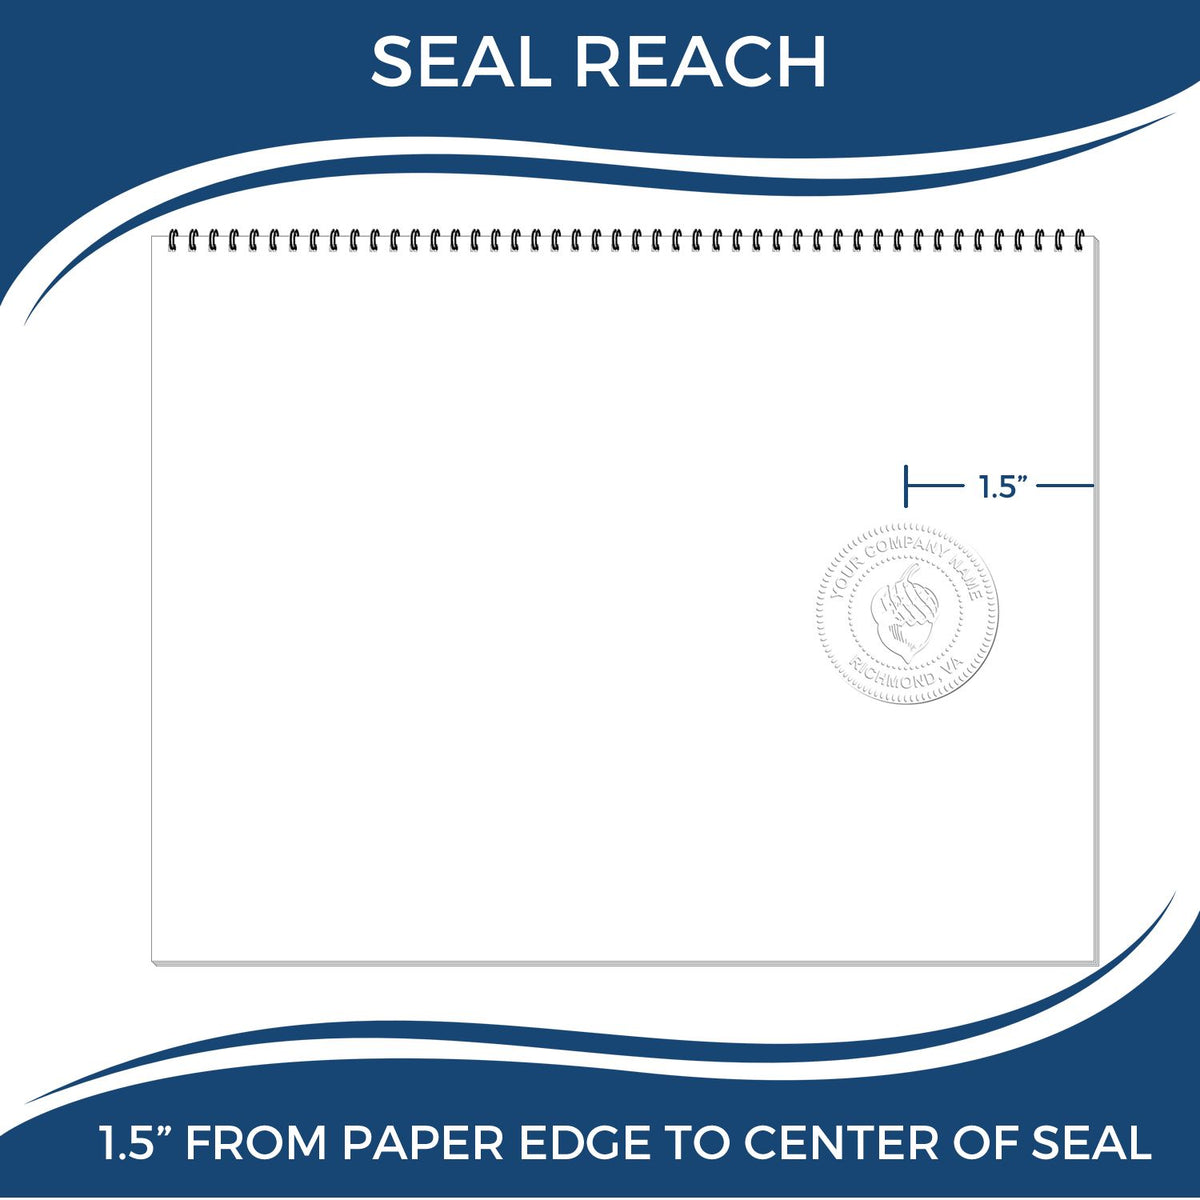 An infographic showing the seal reach which is represented by a ruler and a miniature seal image of the Nebraska Desk Architect Embossing Seal